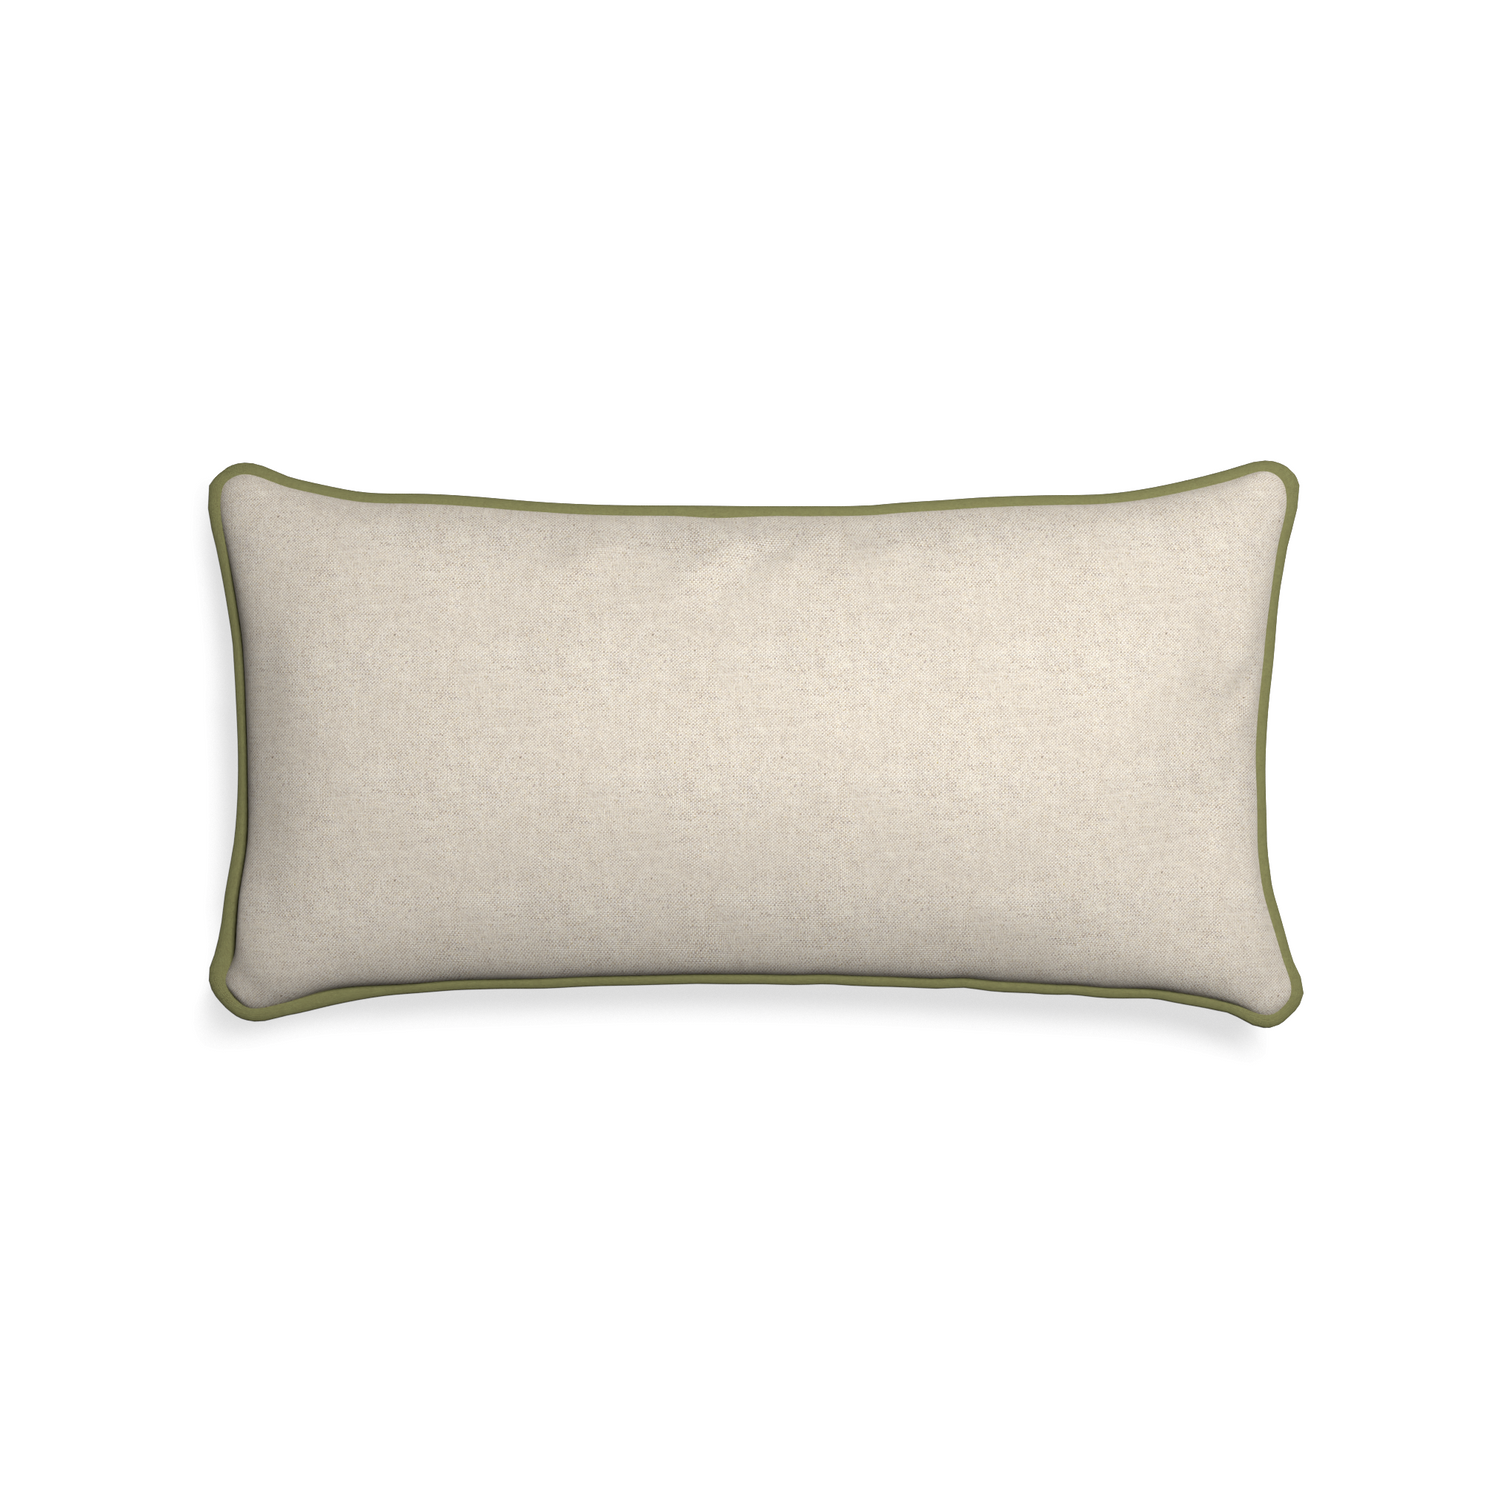 rectangle light brown pillow with moss green piping